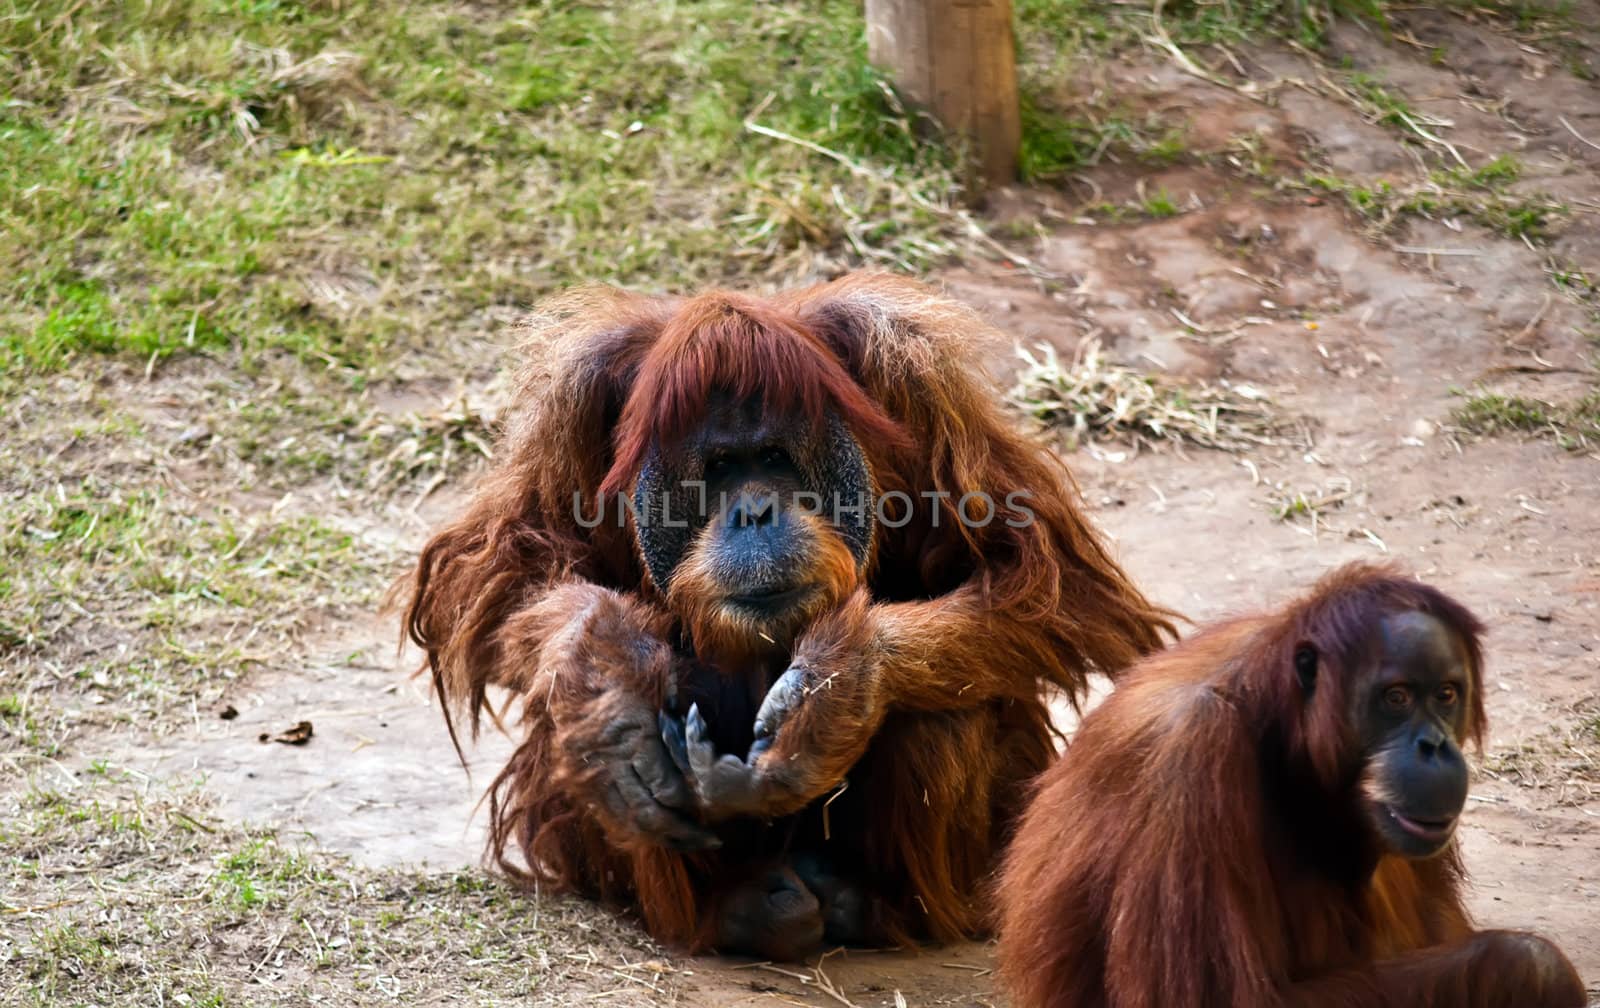 Female and male orangutan . Male orangutan sitting on the ground with outstretched hand.